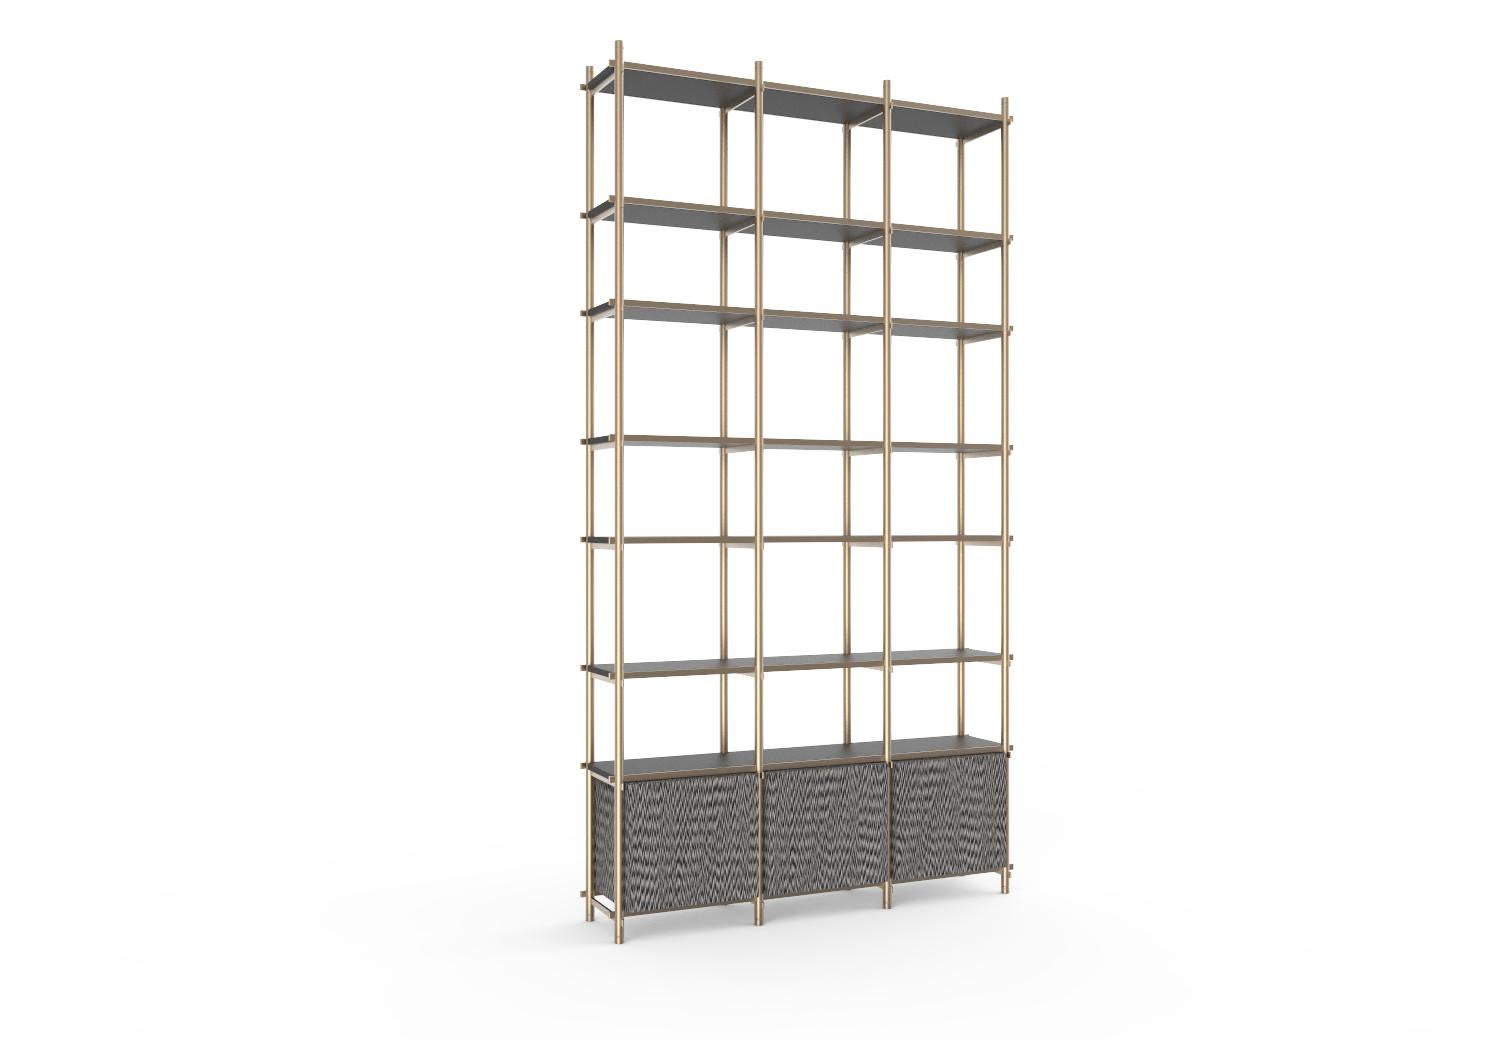 Modular bookshelf with closed modular compartments in different options of wood. Tubular laser-cut interlocking structure in metal, light brass satin finish.